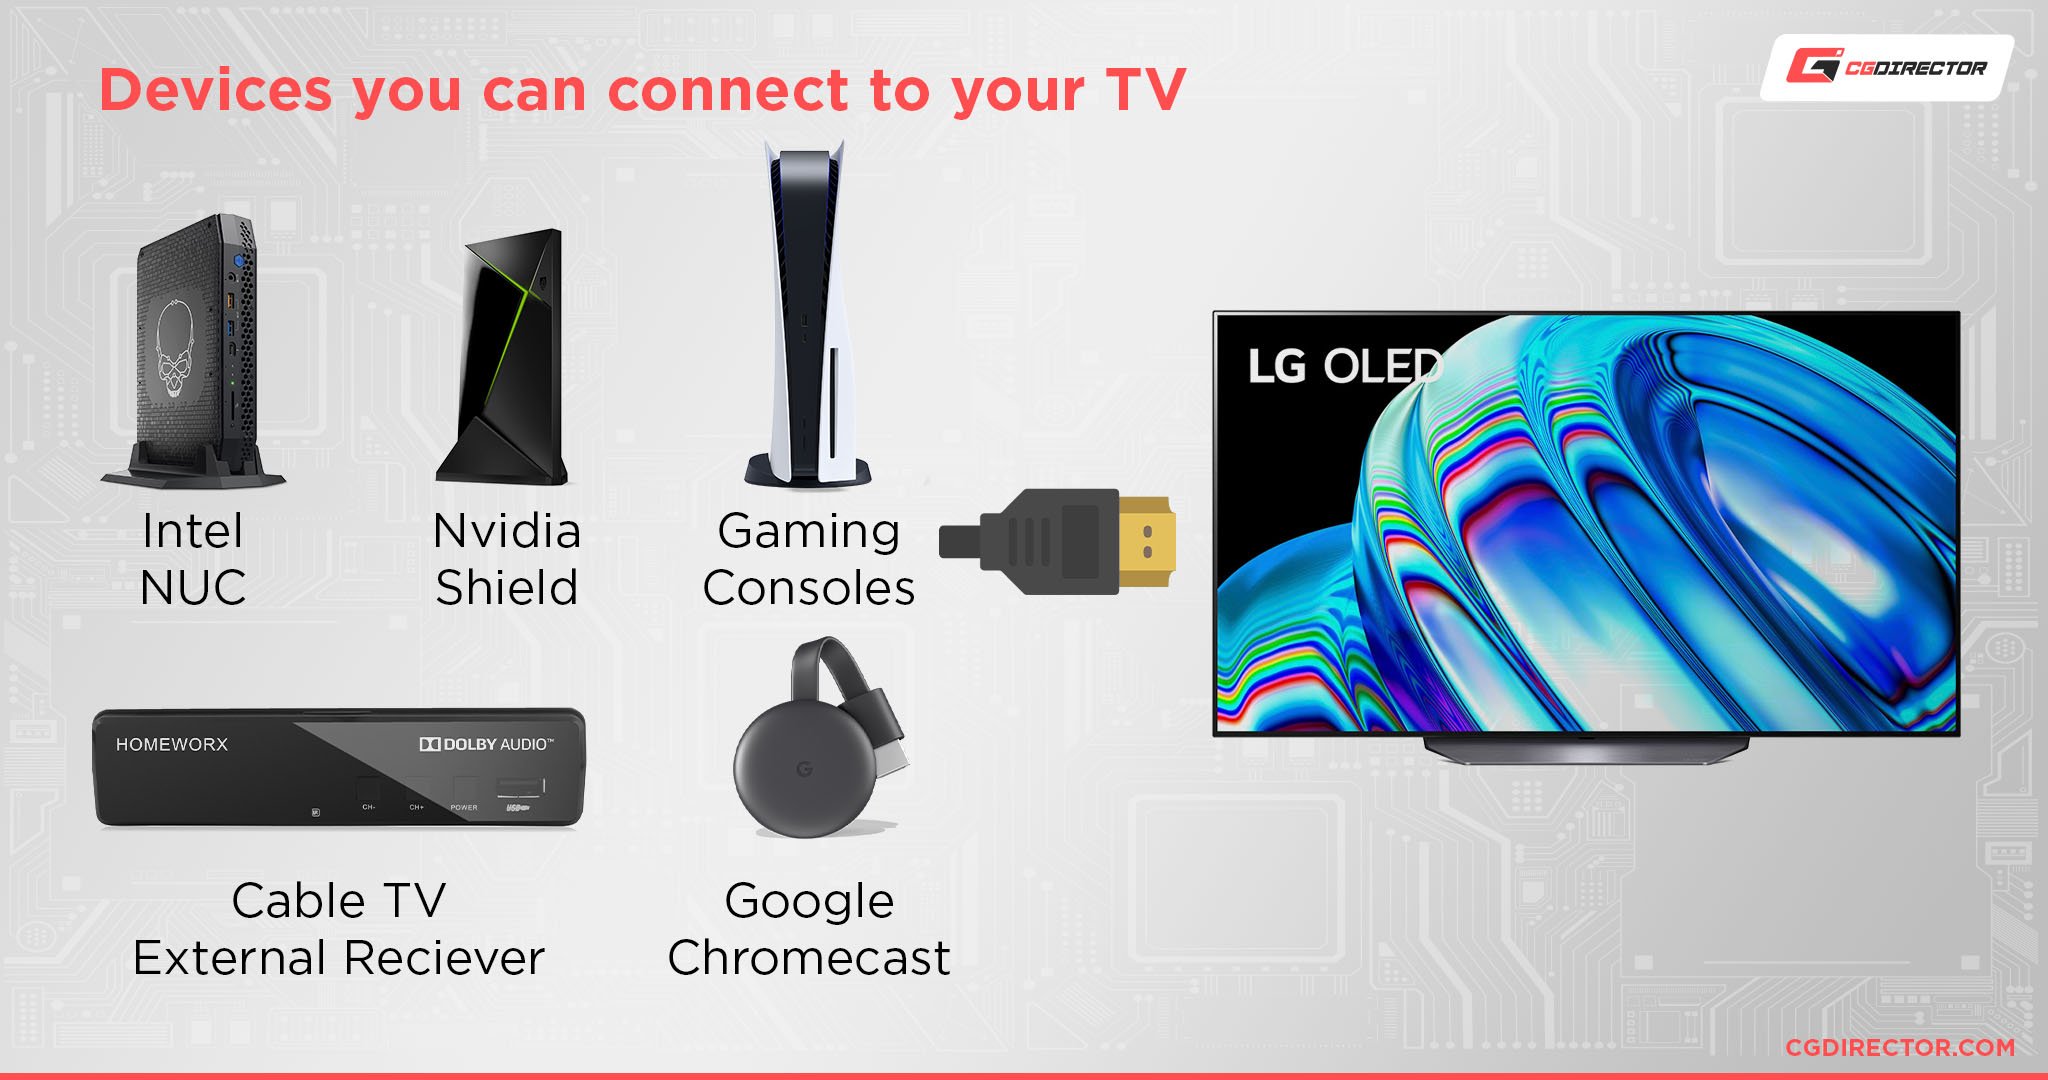 Devices you can connect to your TV